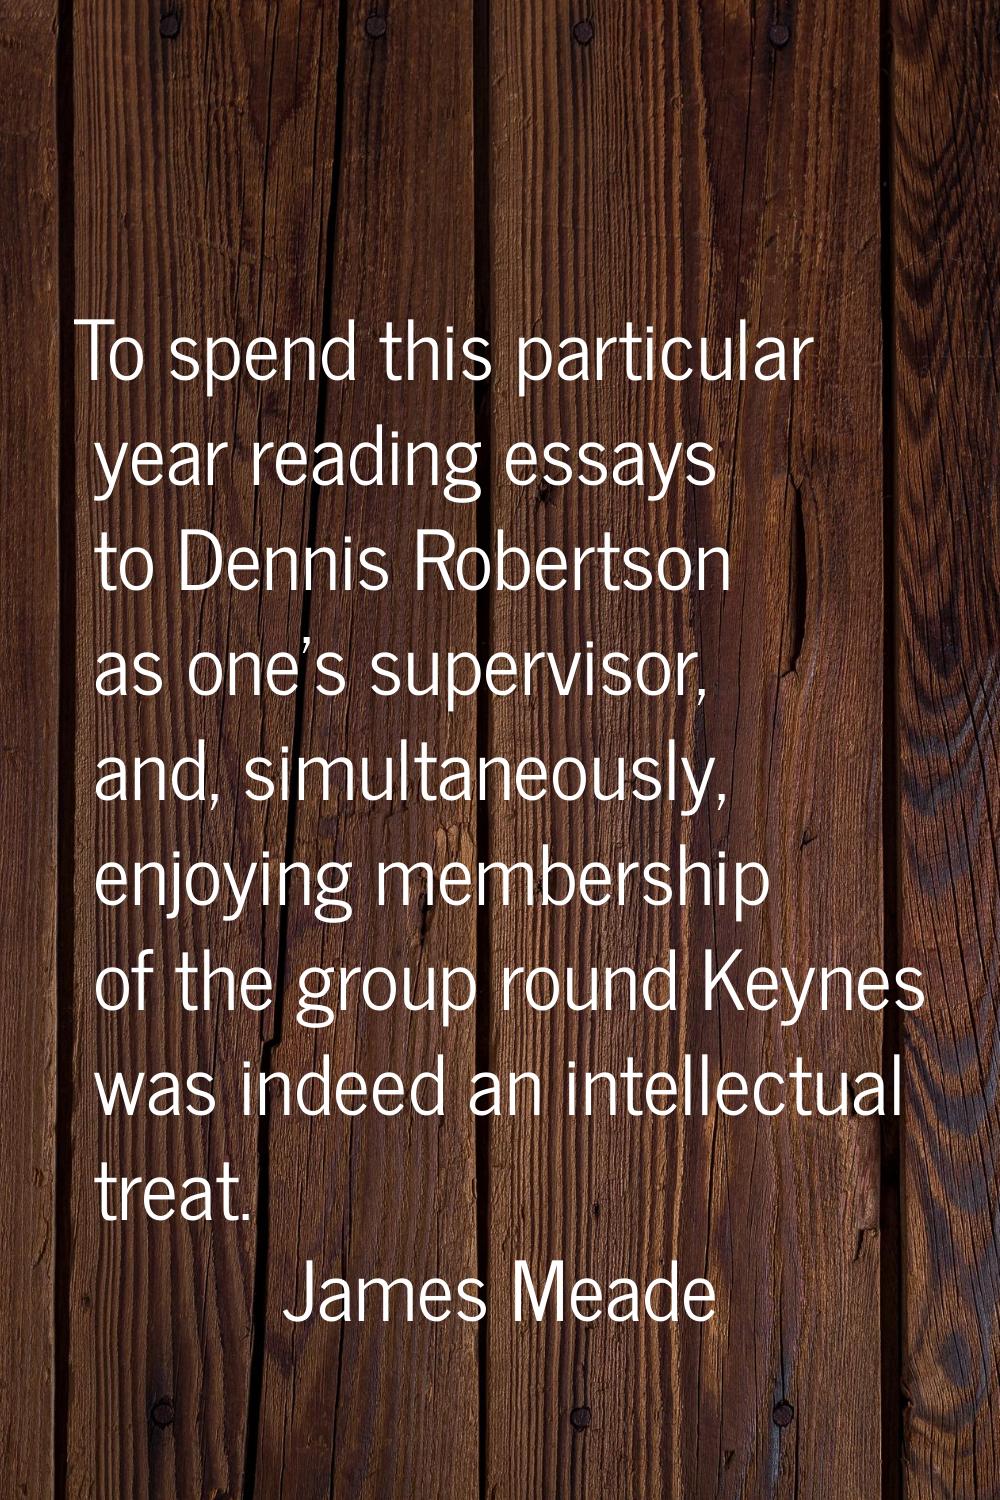 To spend this particular year reading essays to Dennis Robertson as one's supervisor, and, simultan